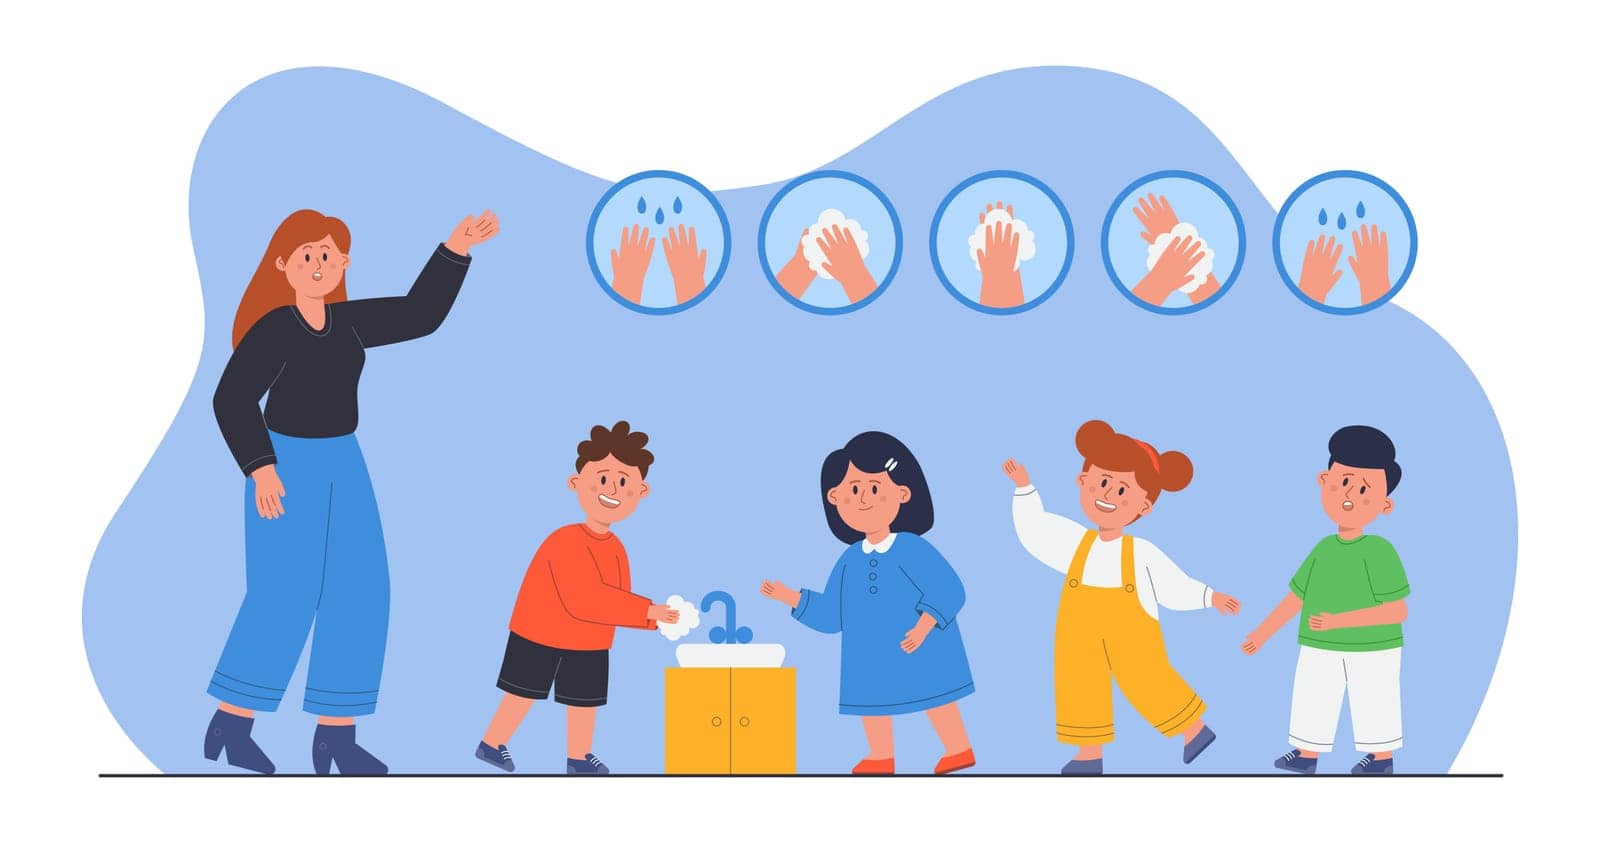 Kindergarten teacher teaching kids hygiene and hand washing. Preschool boys and girls standing together in row near sink flat vector illustration. Guide to properly cleaning hands, education concept